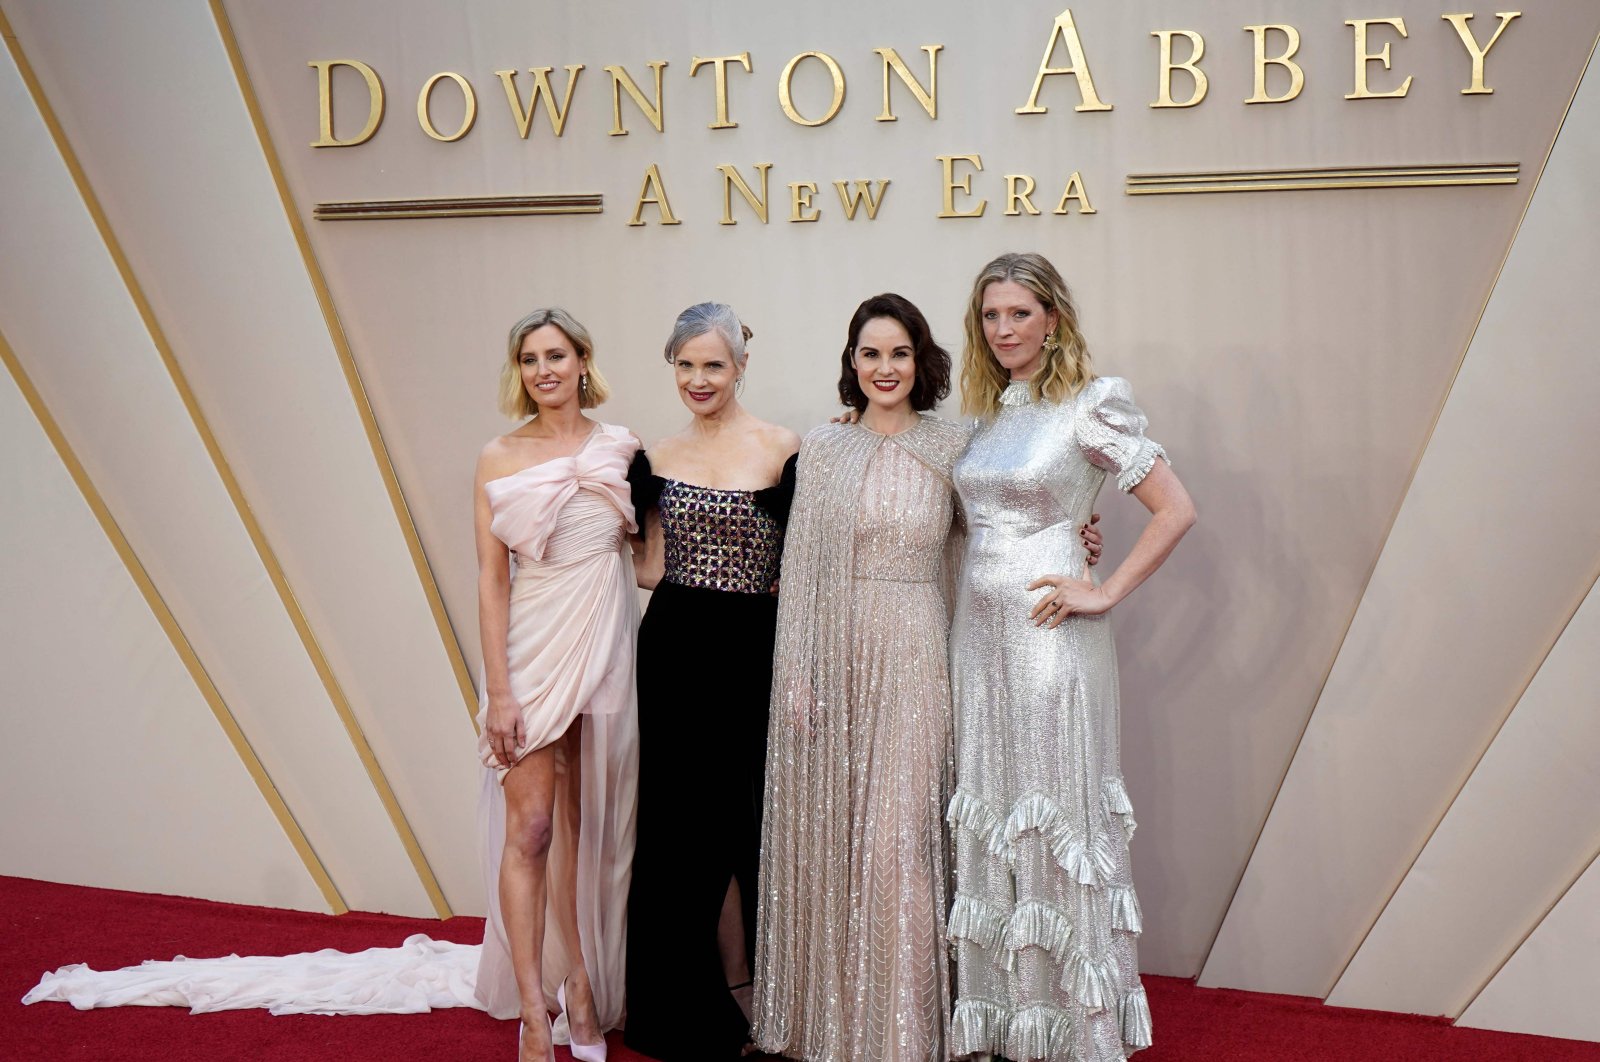 British actor Laura Carmichael (L), U.S. actor Elizabeth McGovern (2nd L), British actor Michelle Dockery (2nd R) and costume designer Anna Robbins (R) pose on the red carpet upon arrival for the world premiere of the film &quot;Downton Abbey: A New Era&quot; in London, U.K., April 25, 2022. (AFP)